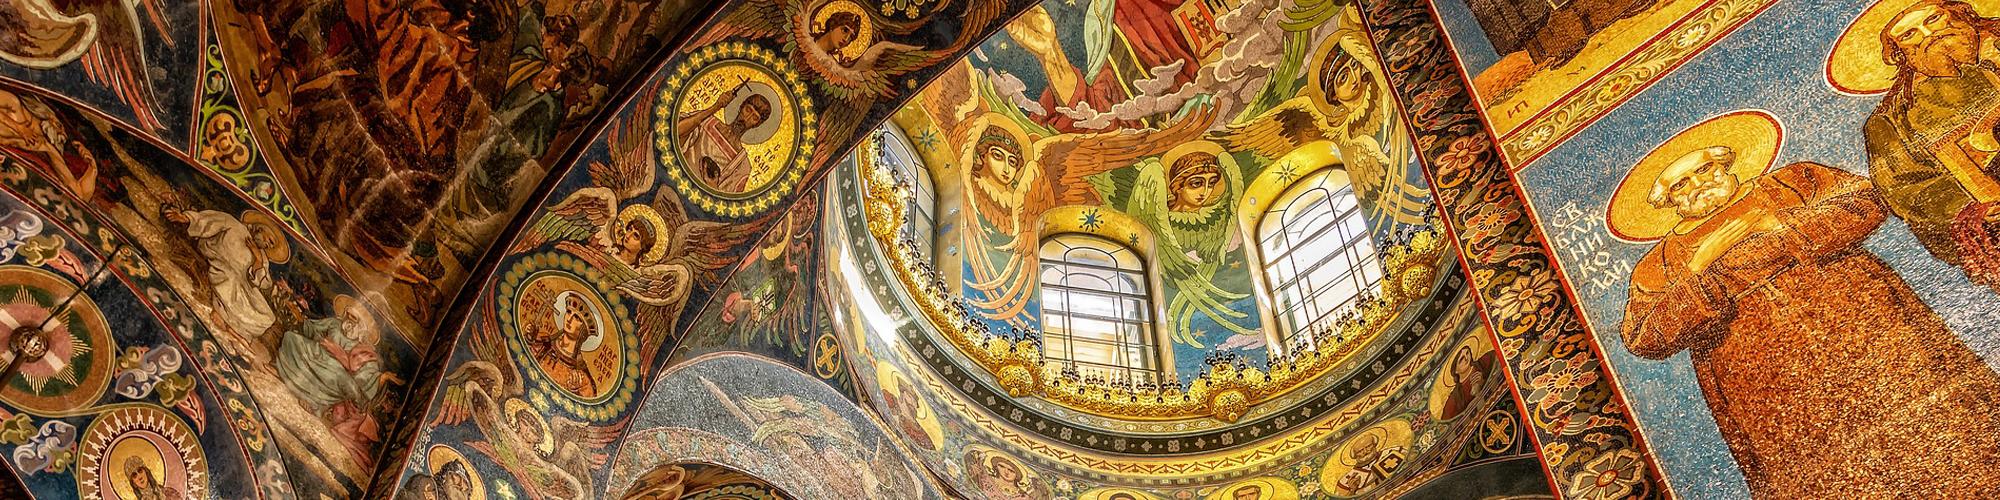 Ceiling of Church of the Spilled Blood